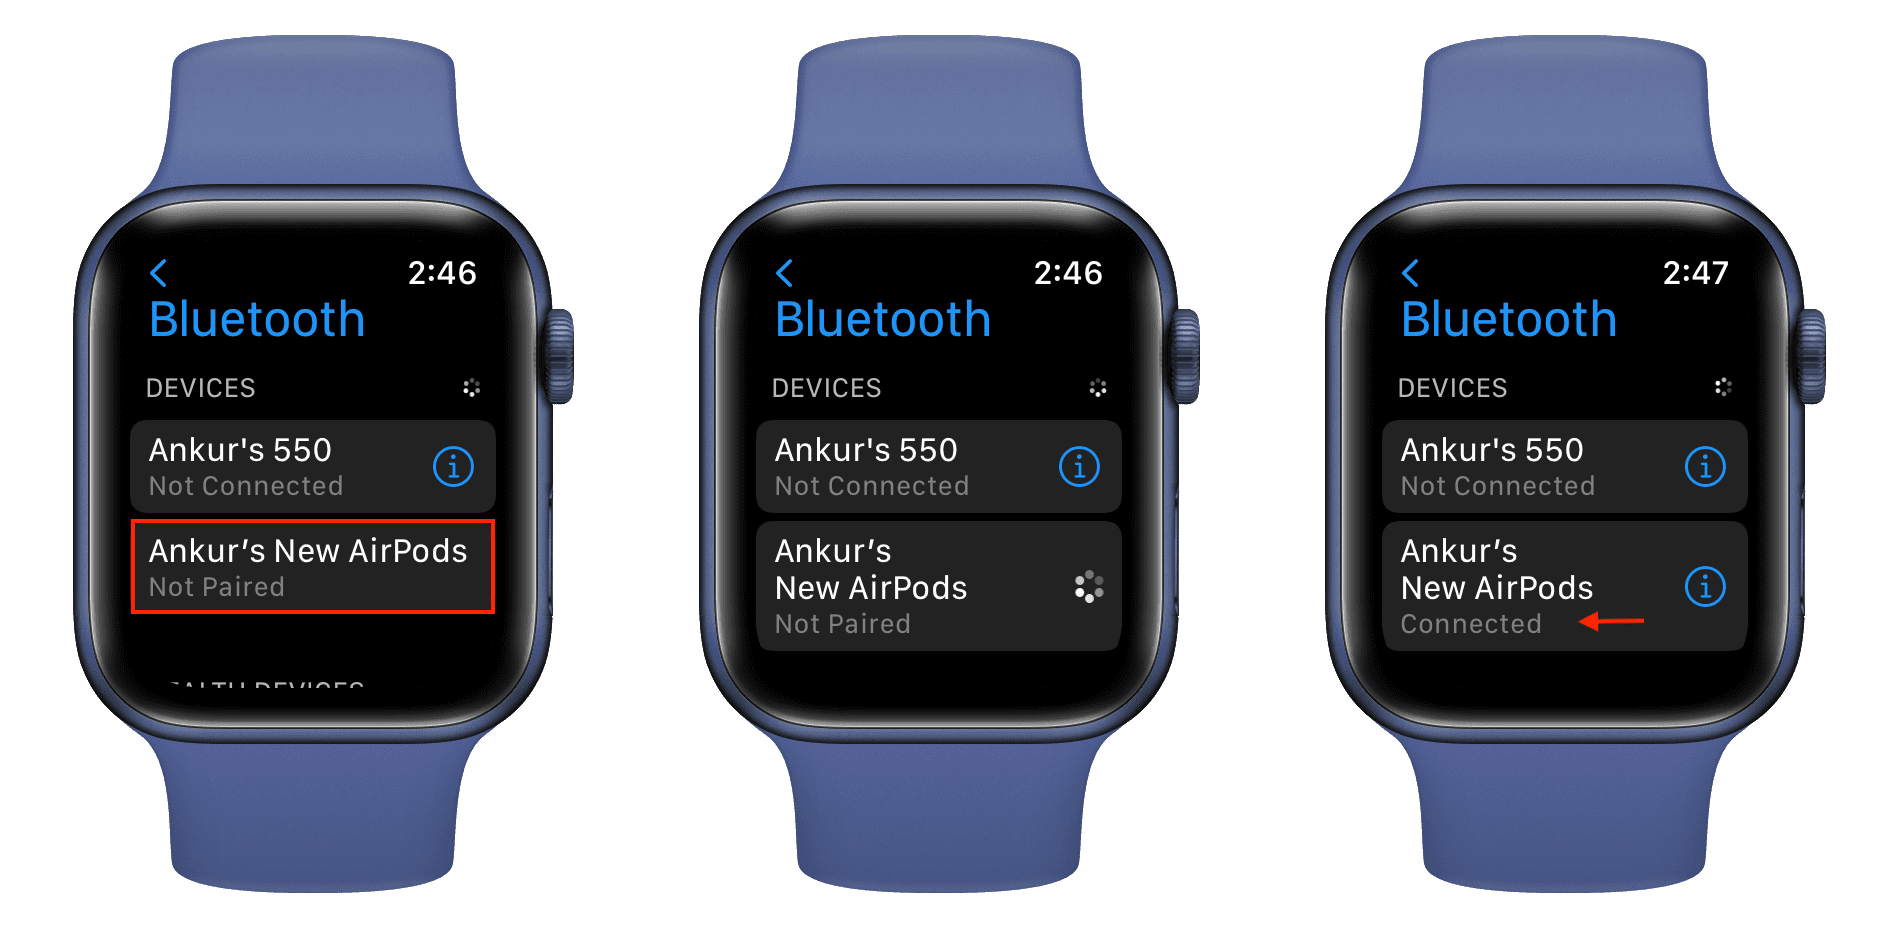 Pair and connect AirPods to Apple Watch